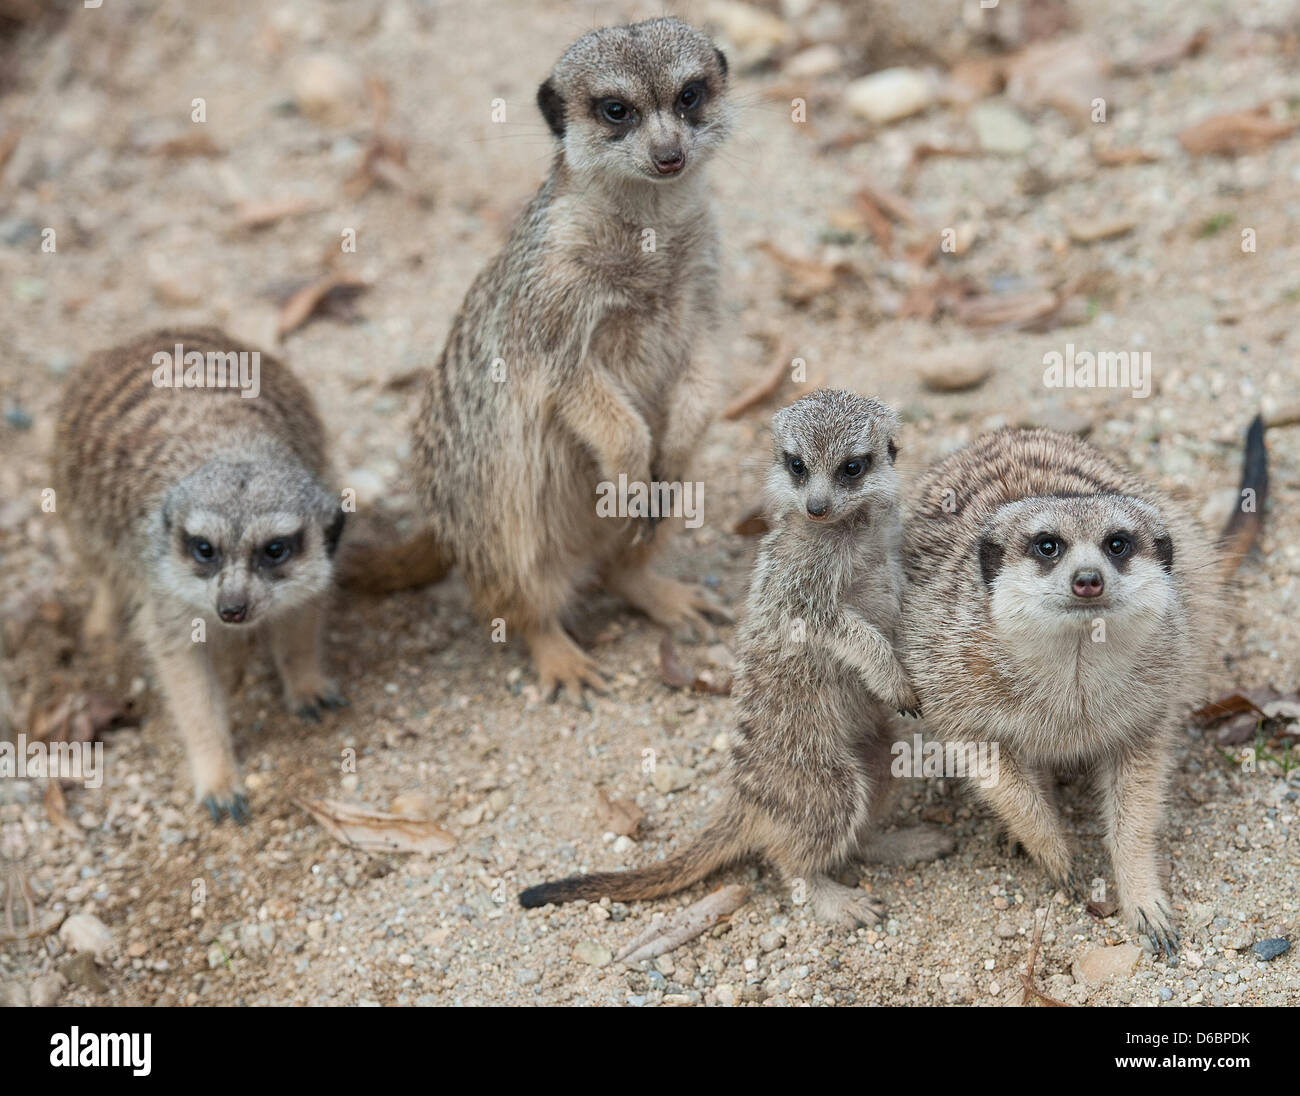 Liberec, Czech Republic. 16th April, 2013. Young Meerkats received the most votes as the best cubs from the visitors of Zoo Liberec. Small beasts grow from 25 to 35 cm and they are registered in the IUCN Red List of Threatened Species. They inhabit dry savannas, deserts and semi-deserts, mostly the South African Kalahari desert. Meerkats are seen in Liberec, Czech Republic, April 16, 2013. (Radek Petrasek/CTK Photo/Alamy Live News) Stock Photo